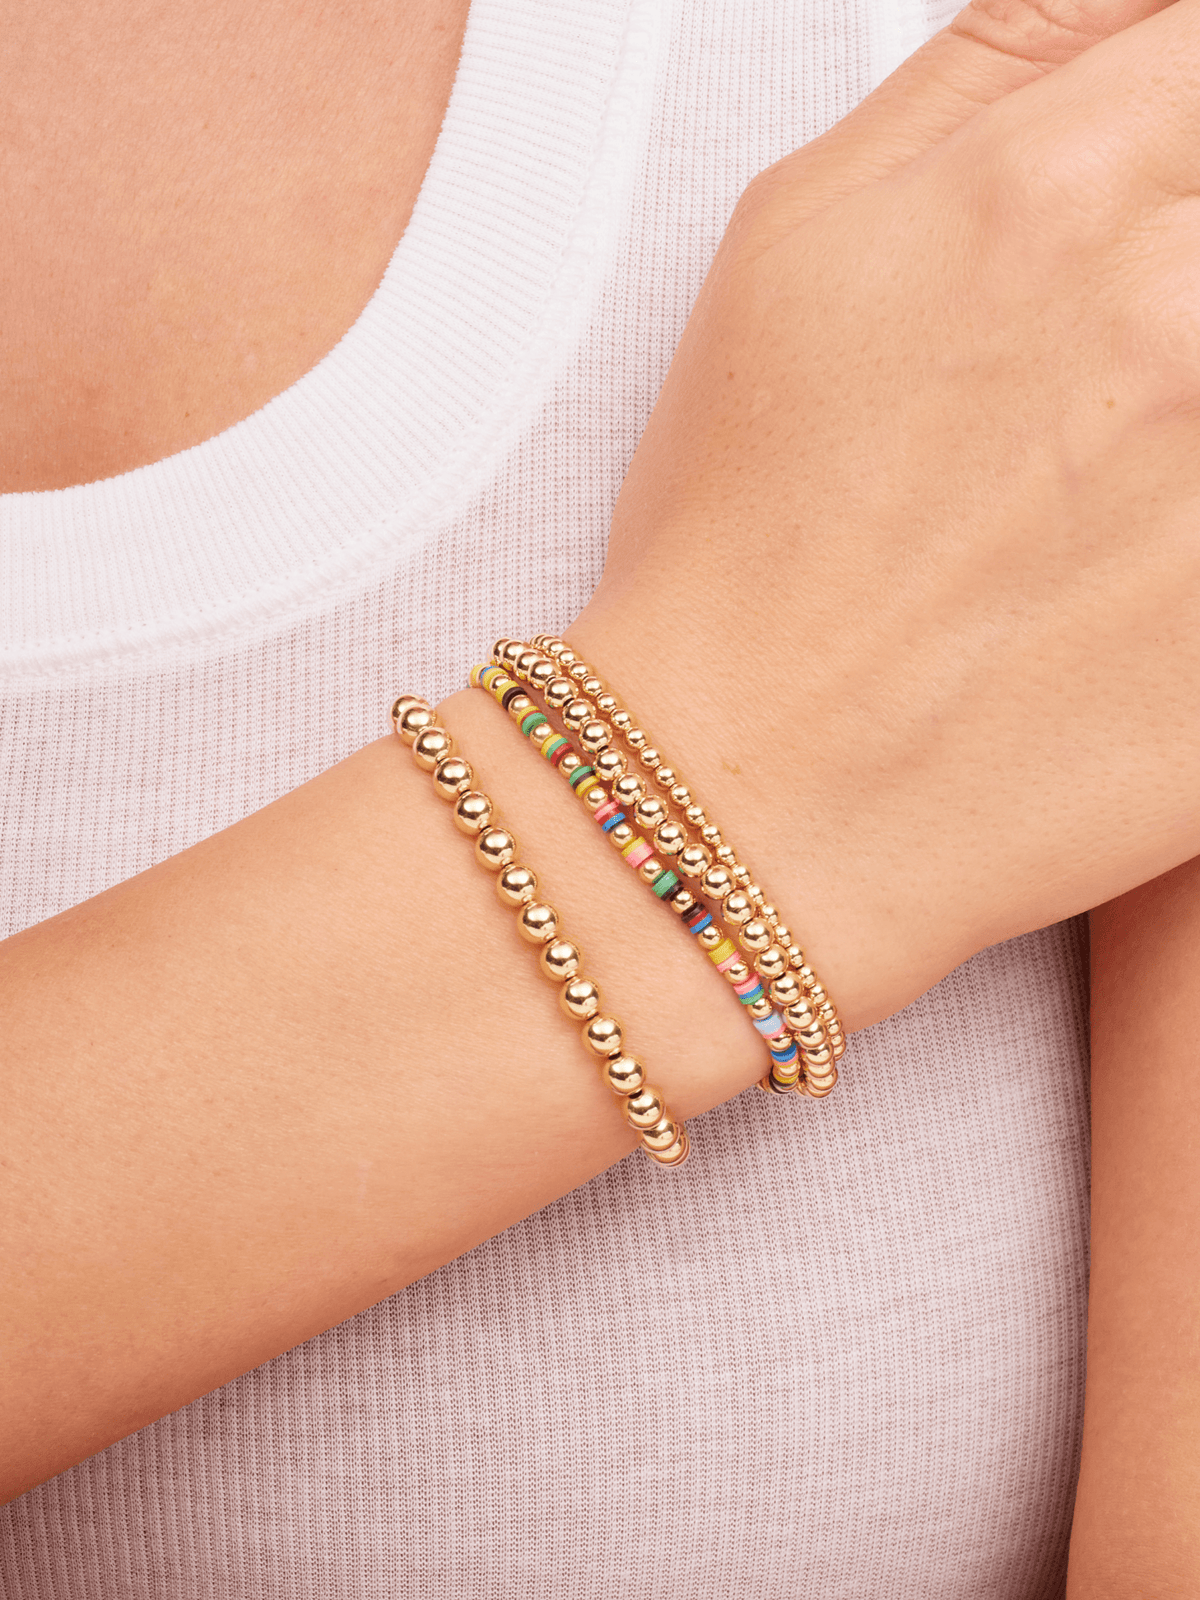 Gold beaded stretch bracelets stacked with colorful bead and gold bead stretch bracelet on model wrist